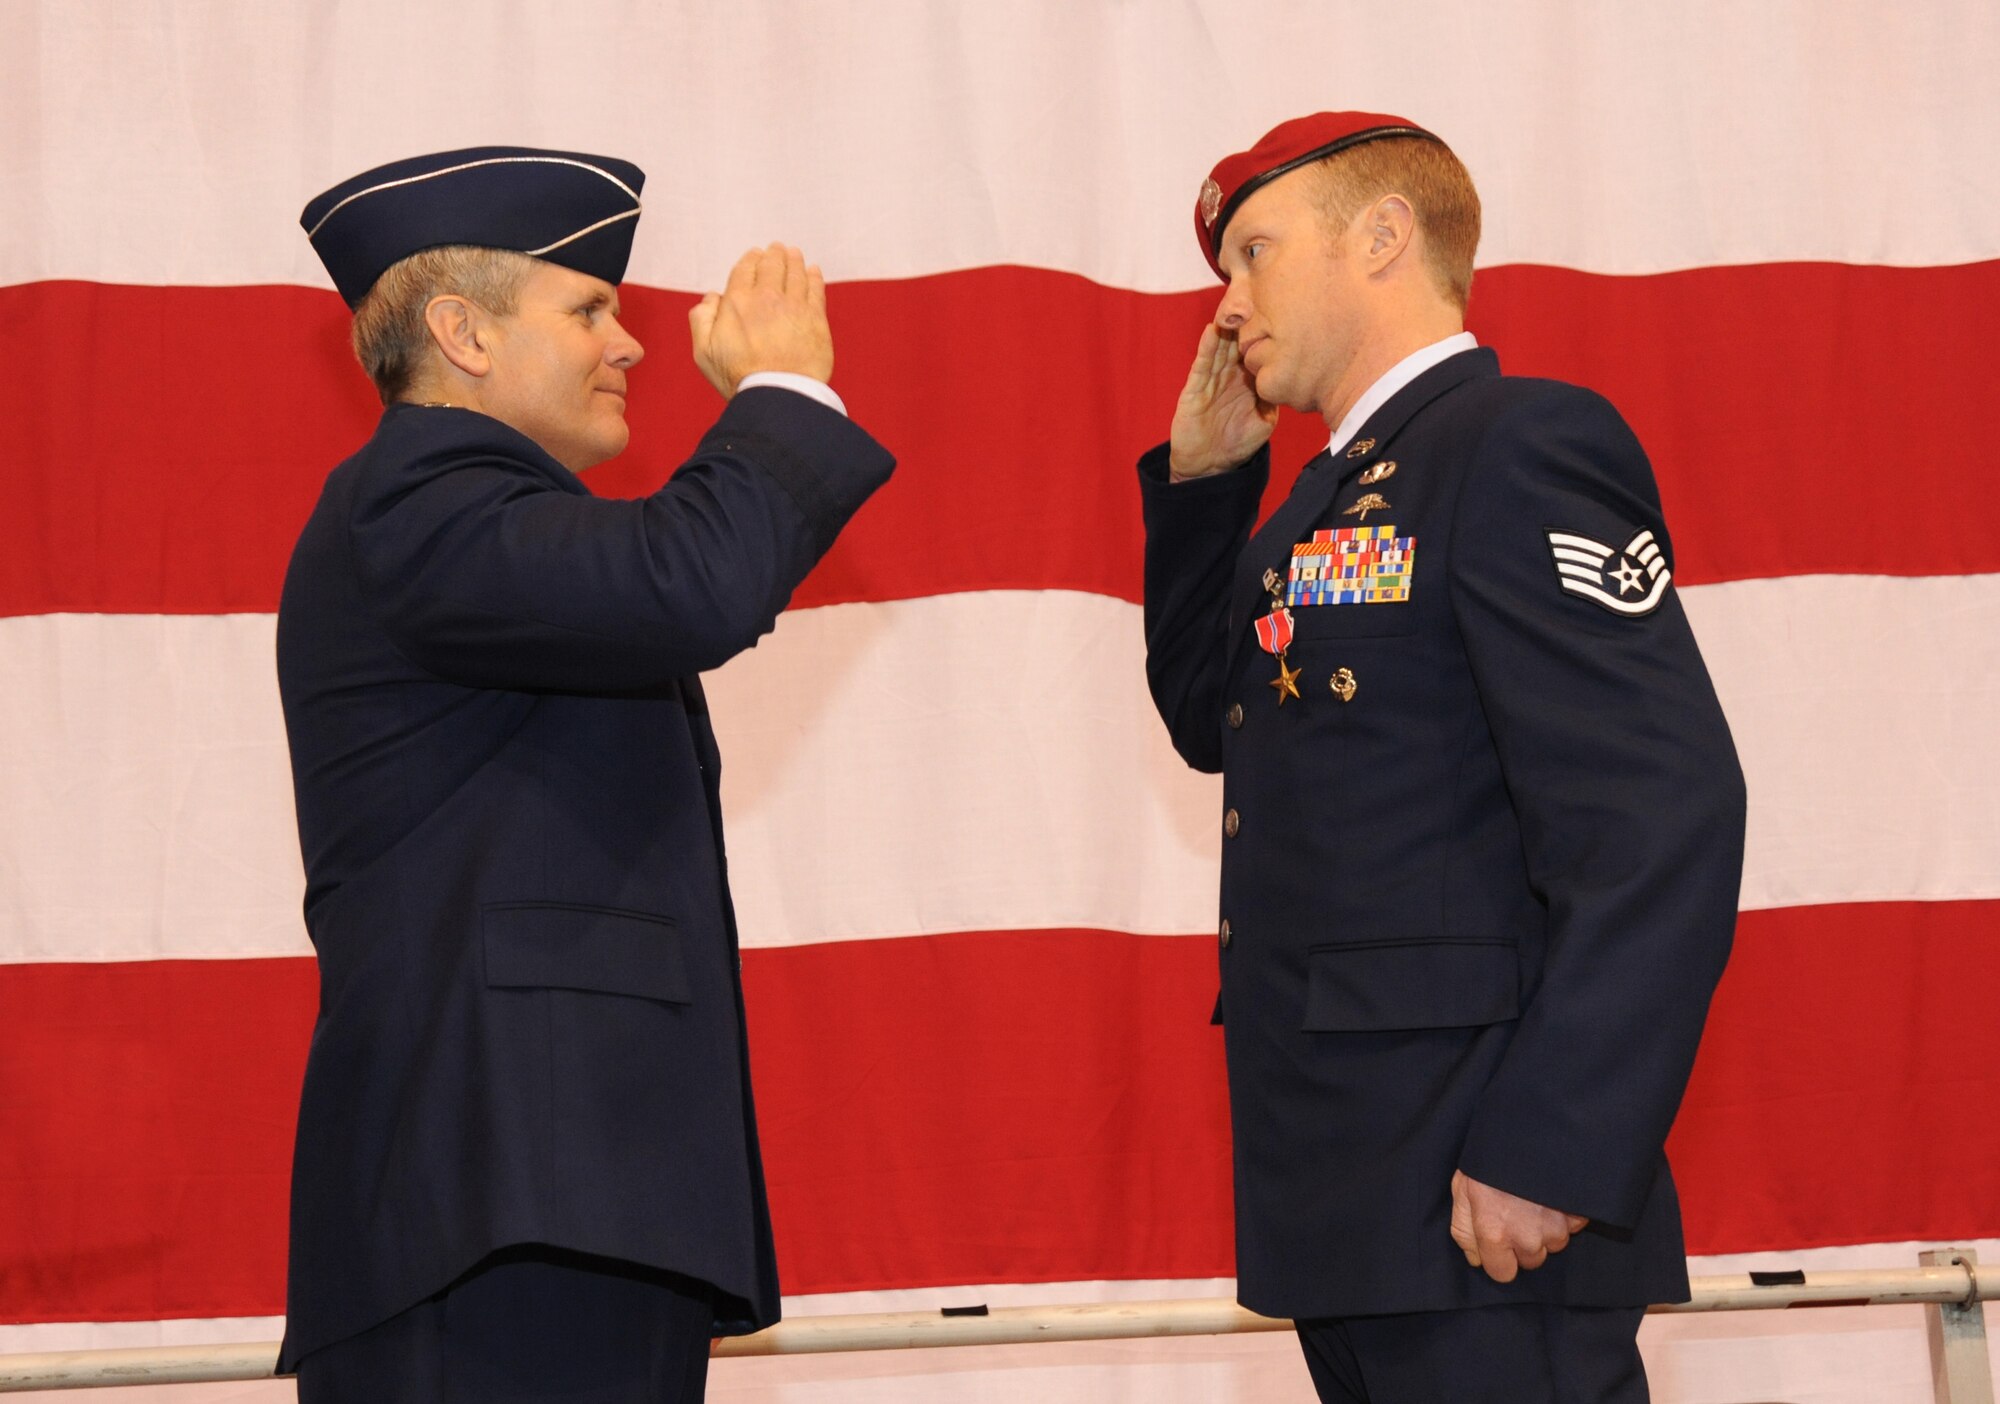 U.S. Air Force Lt. Gen. Eric E. Feil, commander of Air Force Special Operations Command, salutes Staff Sgt. Jacob M. Guffey of the 125th Special Tactics Squadron after he received his Bronze Star Medal during an award ceremony held at the Portland Air National Guard Base, Portland, Ore., Jan. 23.  The event honored Airmen from the unit with five Bronze Star Medals and one Purple Heart medal.  The Airmen earned the medals during recent deployments to the Middle East. Fiel flew in from AFSOC headquarters at Hulburt Field, Fla., for the ceremony (U.S. Air Force photo by Tech. Sgt. John Hughel, 142nd Fighter Wing Public Affairs/Released)